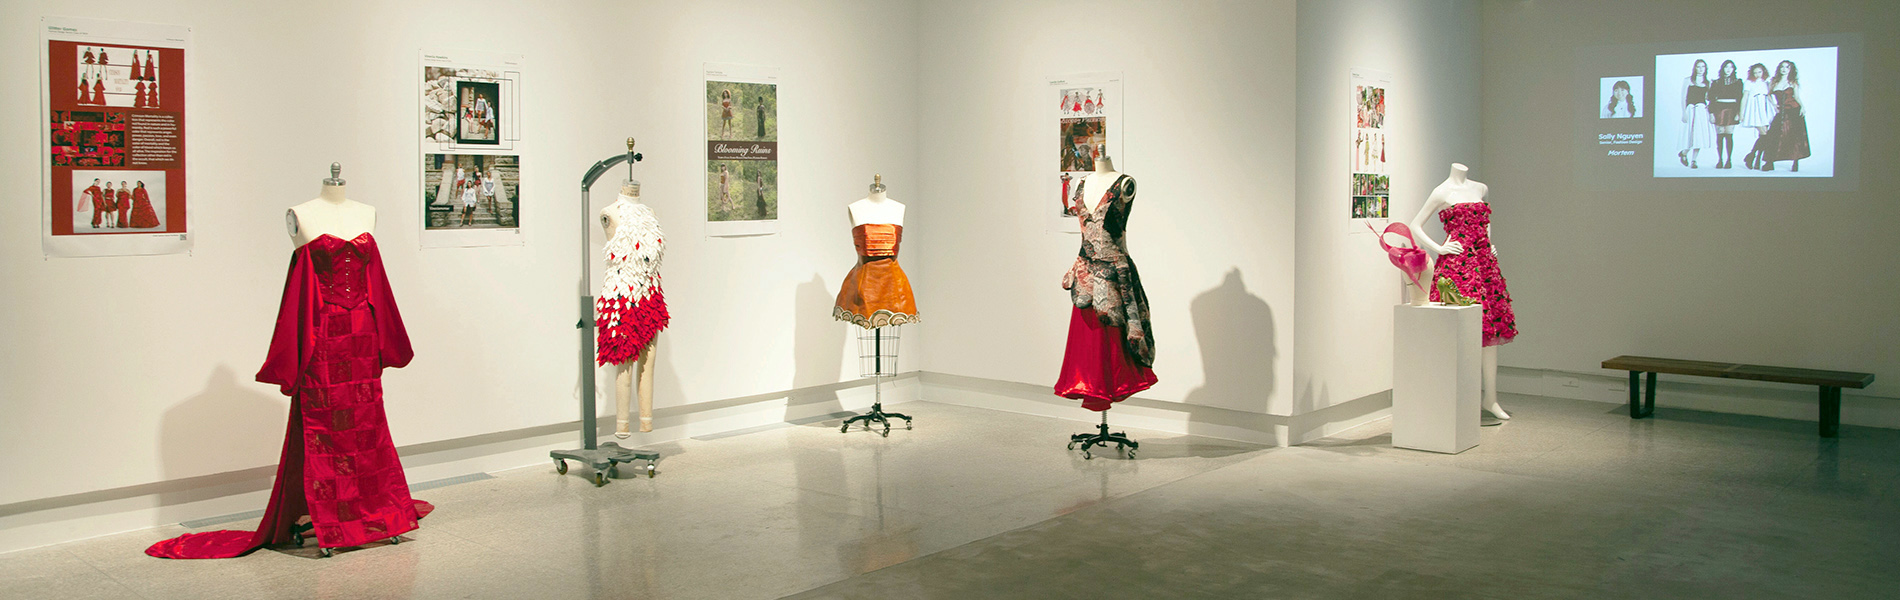 Five dresses displayed on dress forms with five posters on the wall in the CVAD Gallery.